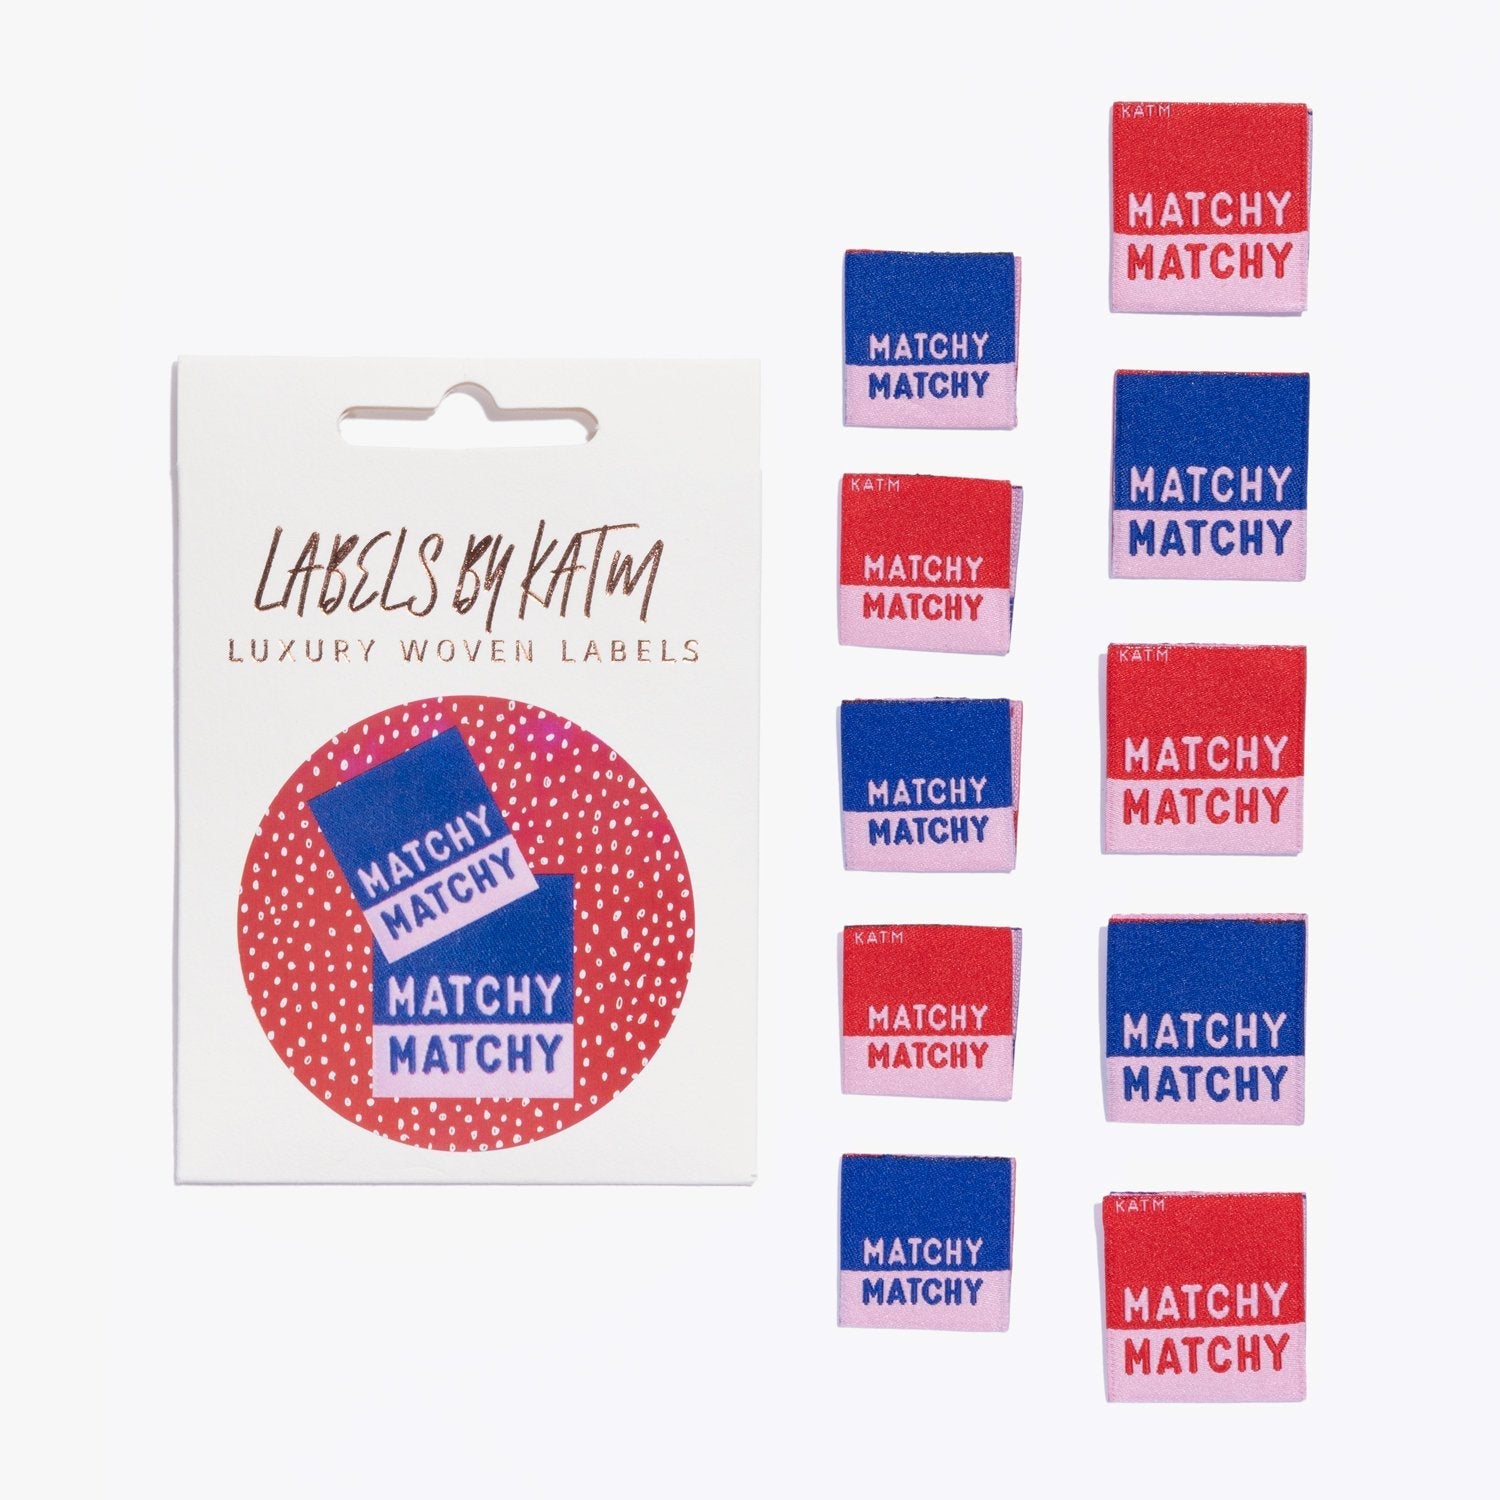 10 Woven Labels - Matchy Matchy - MaaiDesign